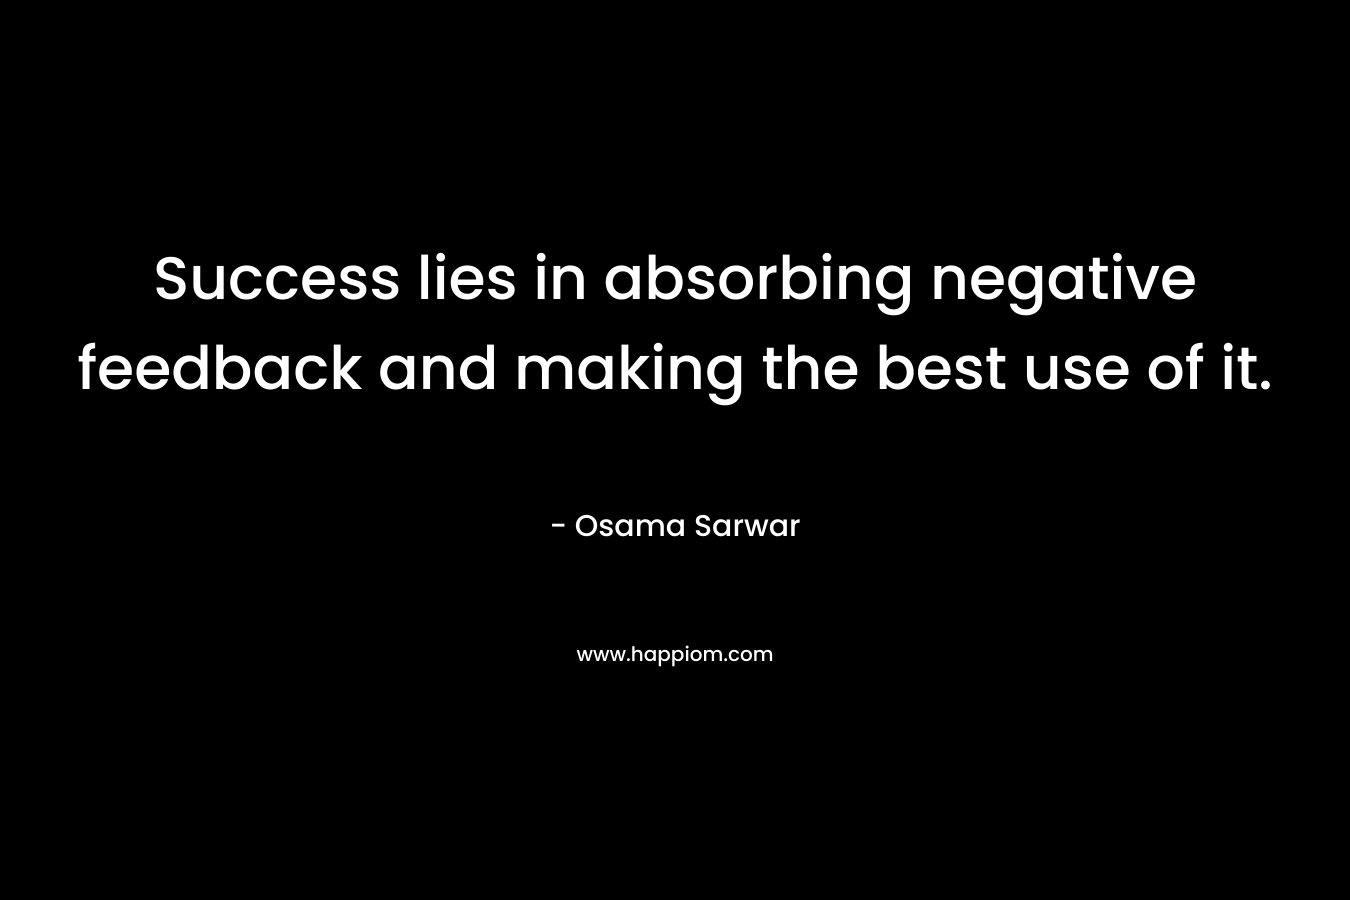 Success lies in absorbing negative feedback and making the best use of it. – Osama Sarwar